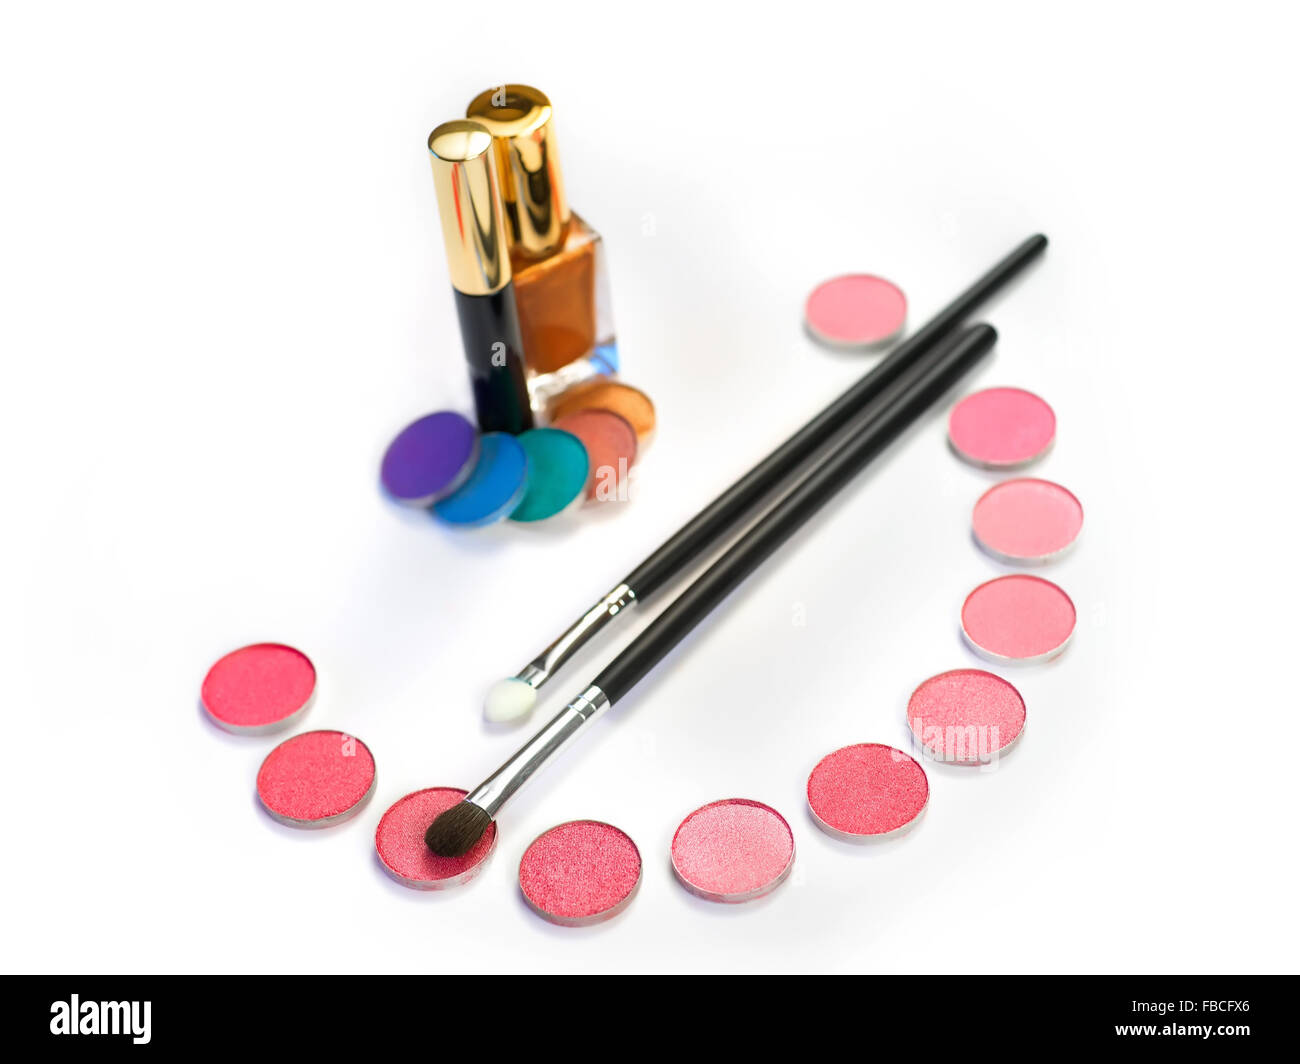 Stil life with eye shadows and make-up brushes on white Stock Photo